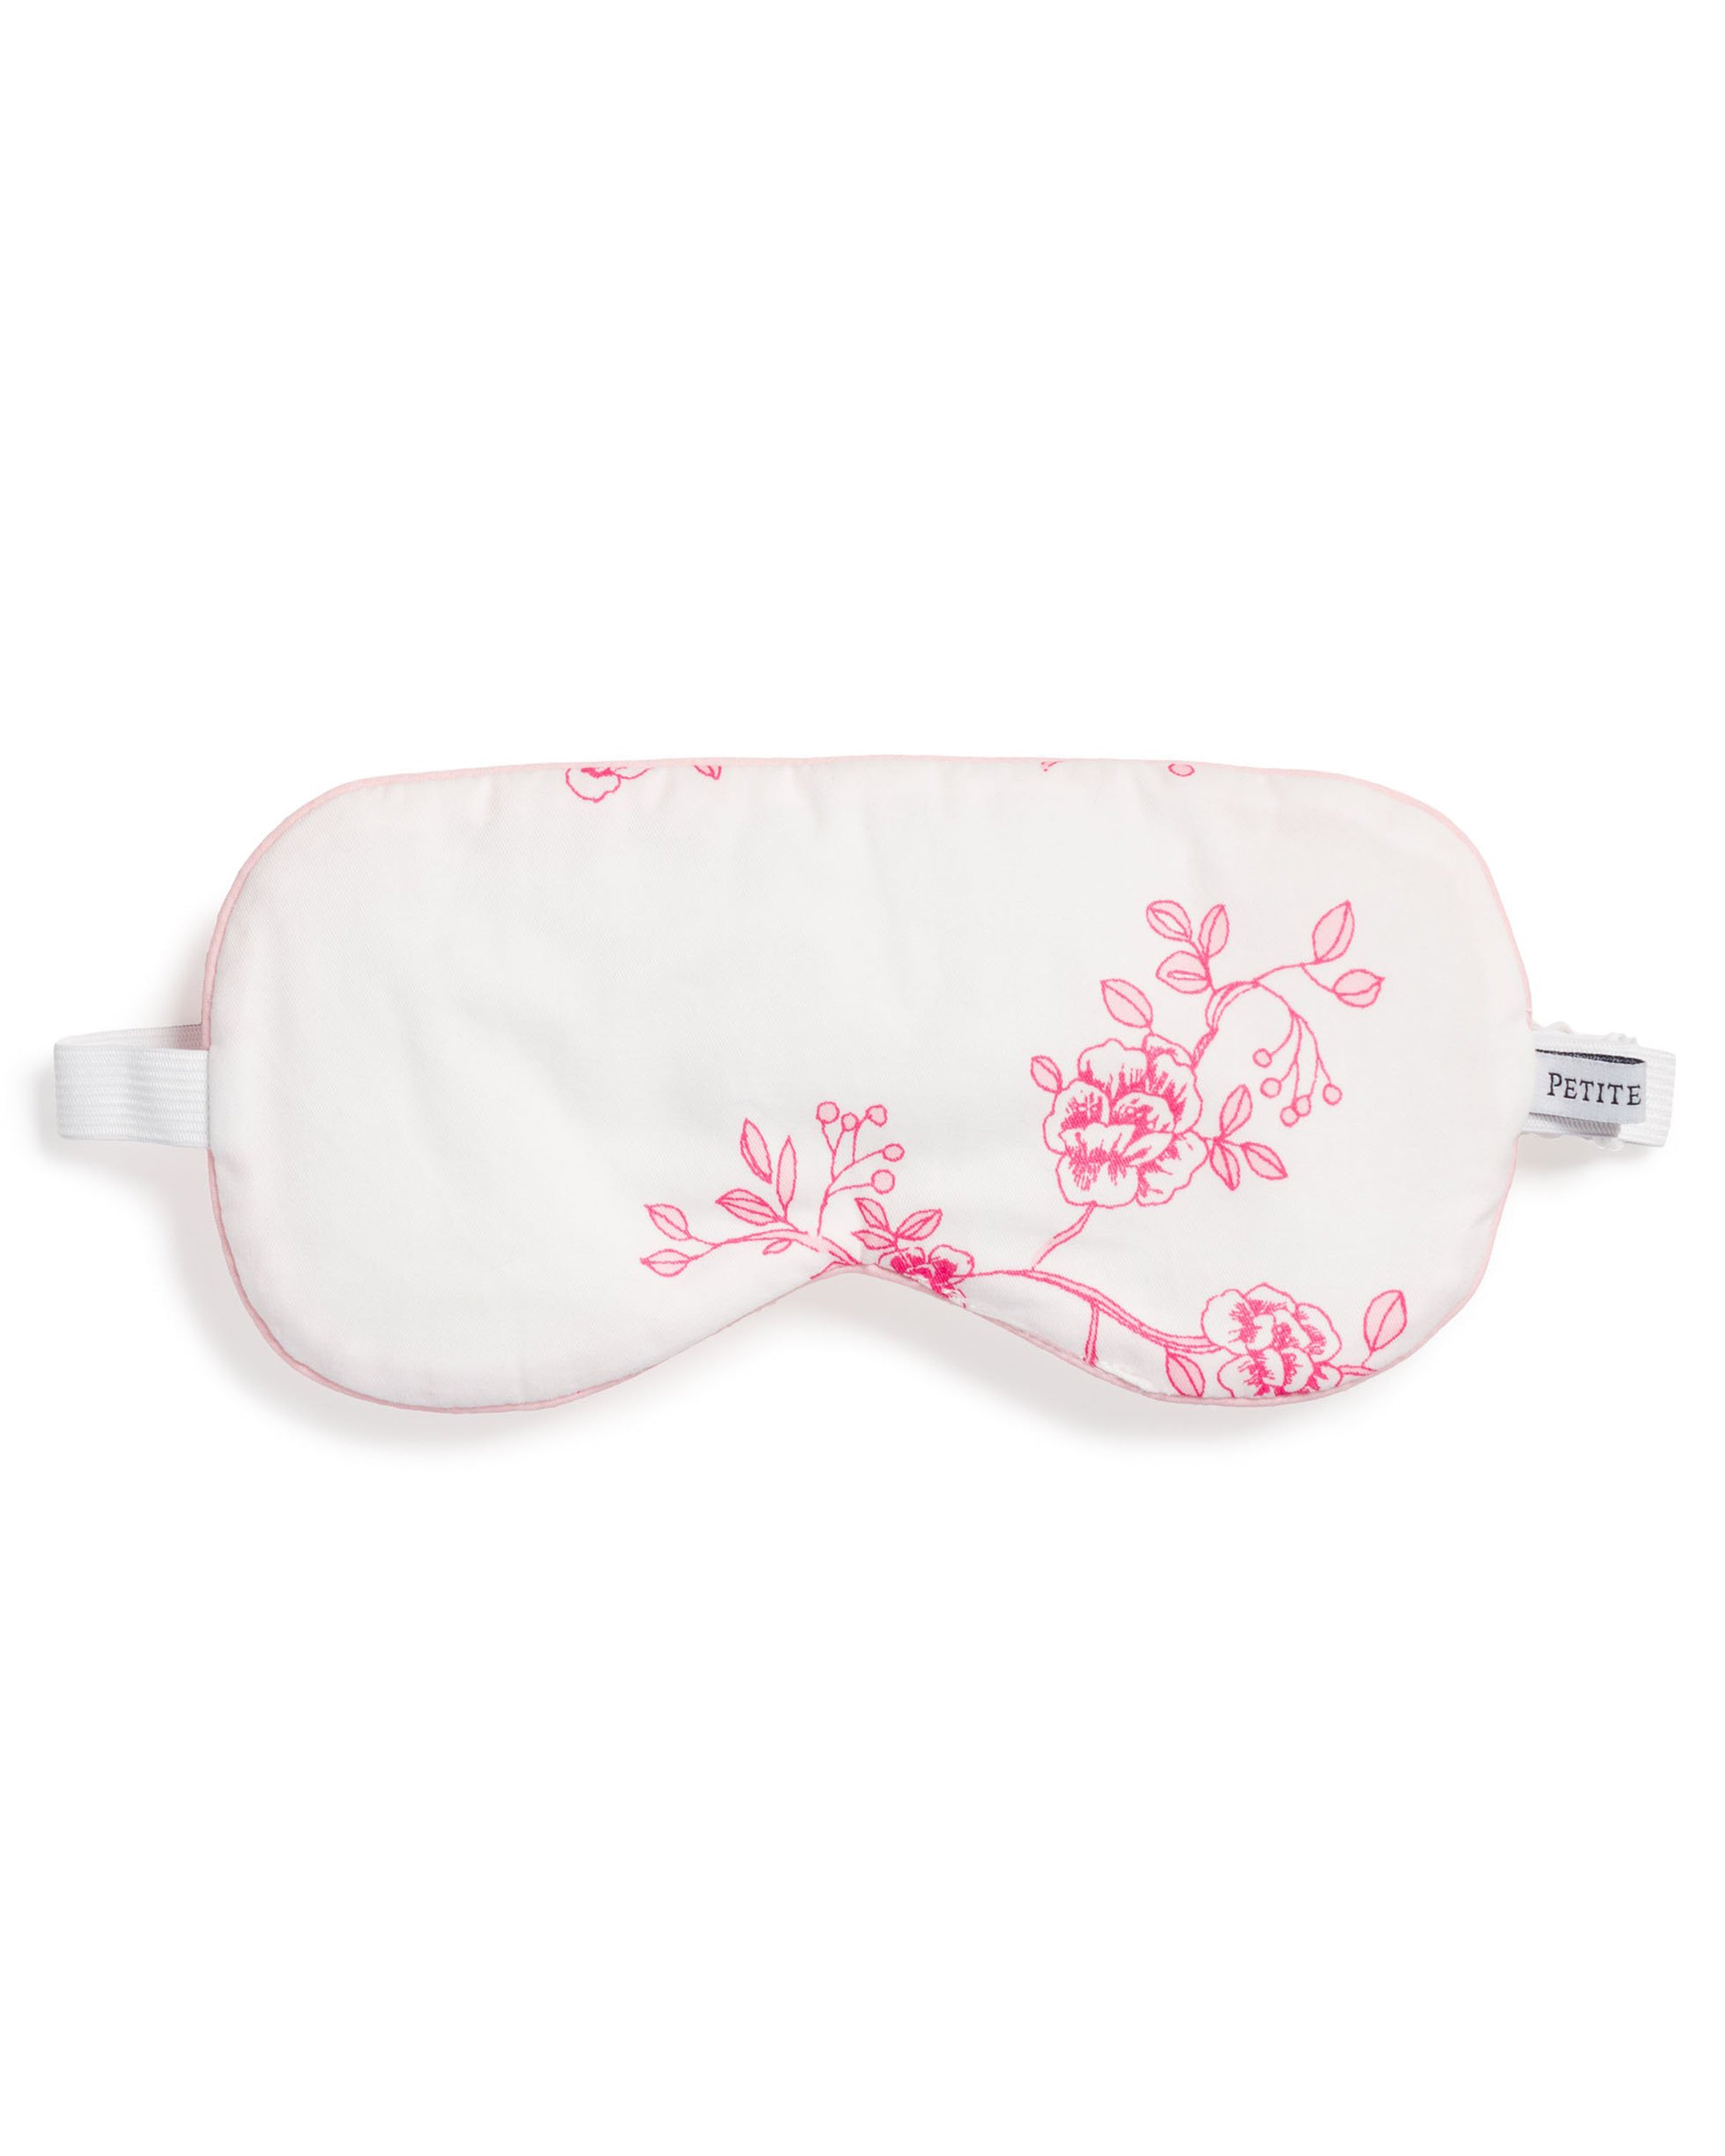 Adult's Sleep Mask in English Rose